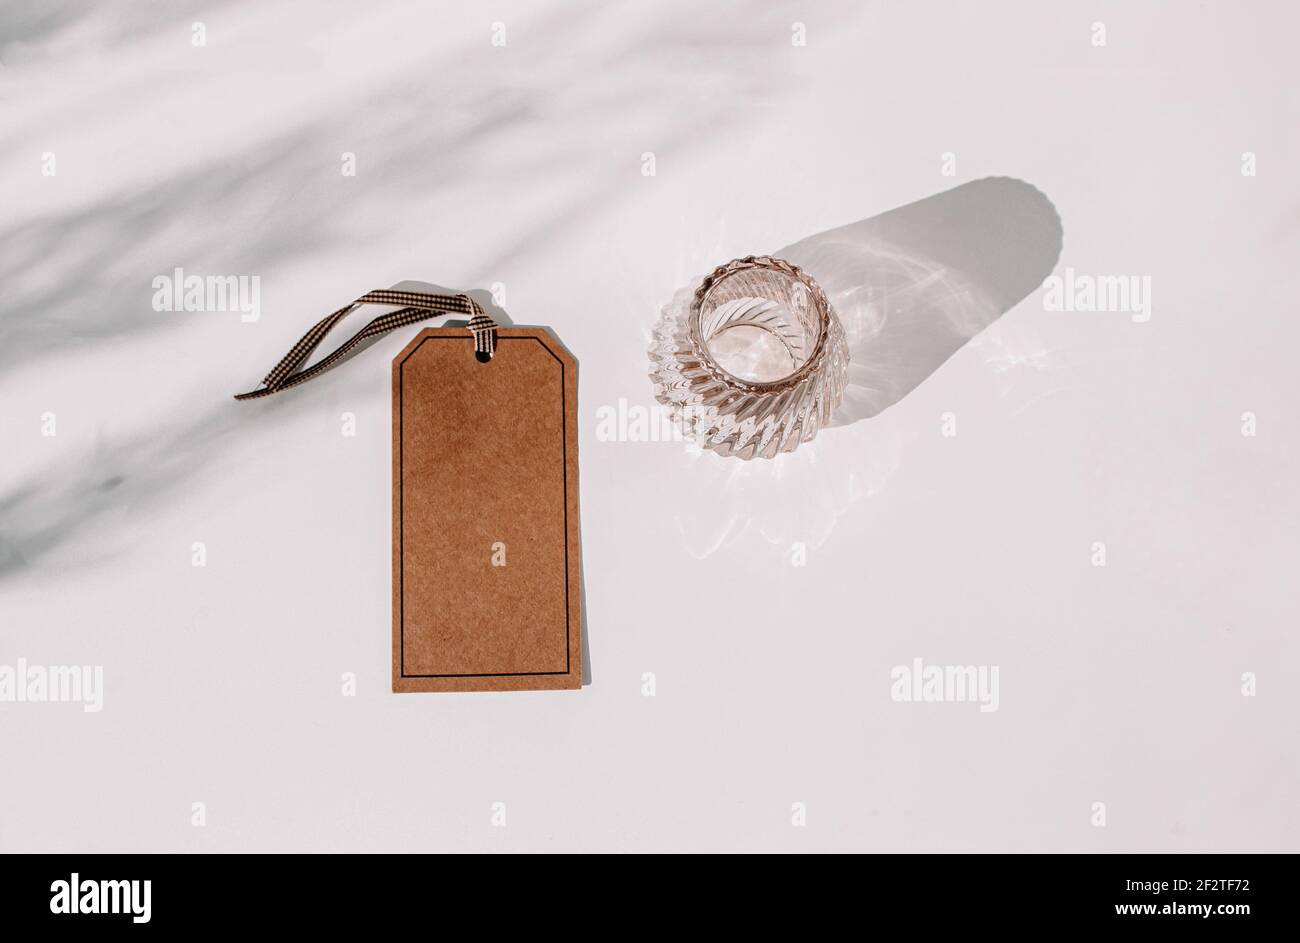 Brown tag with a glass on a white table with shades, add a text on a tag or your own design element Stock Photo